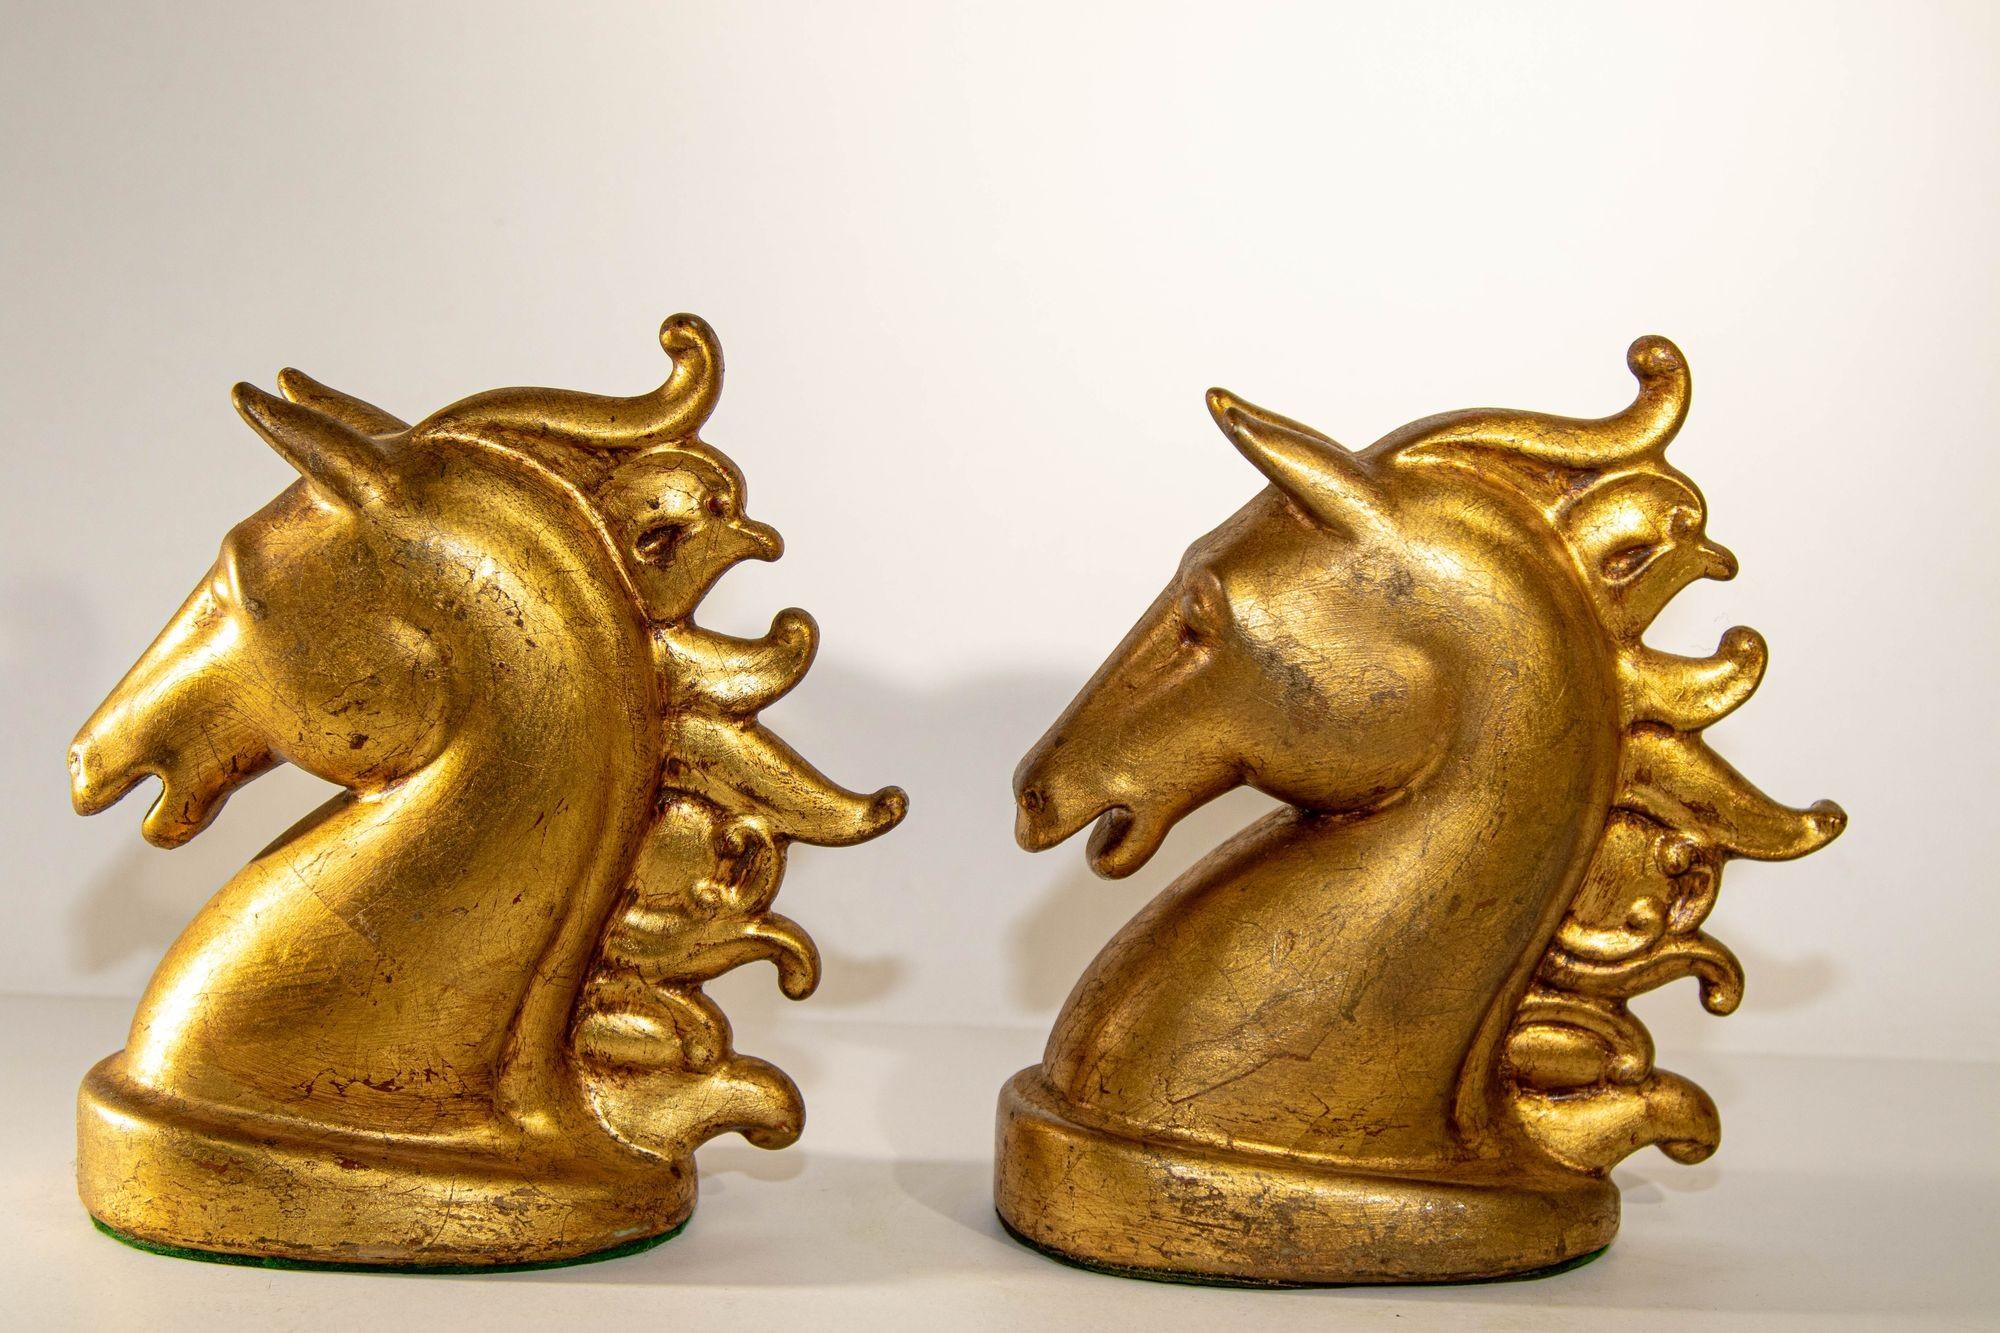 Striking pair of vintage gilt ceramic horse head bookends, circa 1950s, Equestrian Decor.
Pair of 24 K gilt leaf brass antique look midcentury bookends sculpted in the form of Majestic horse heads.
Art Deco style bookends ceramic well modeled